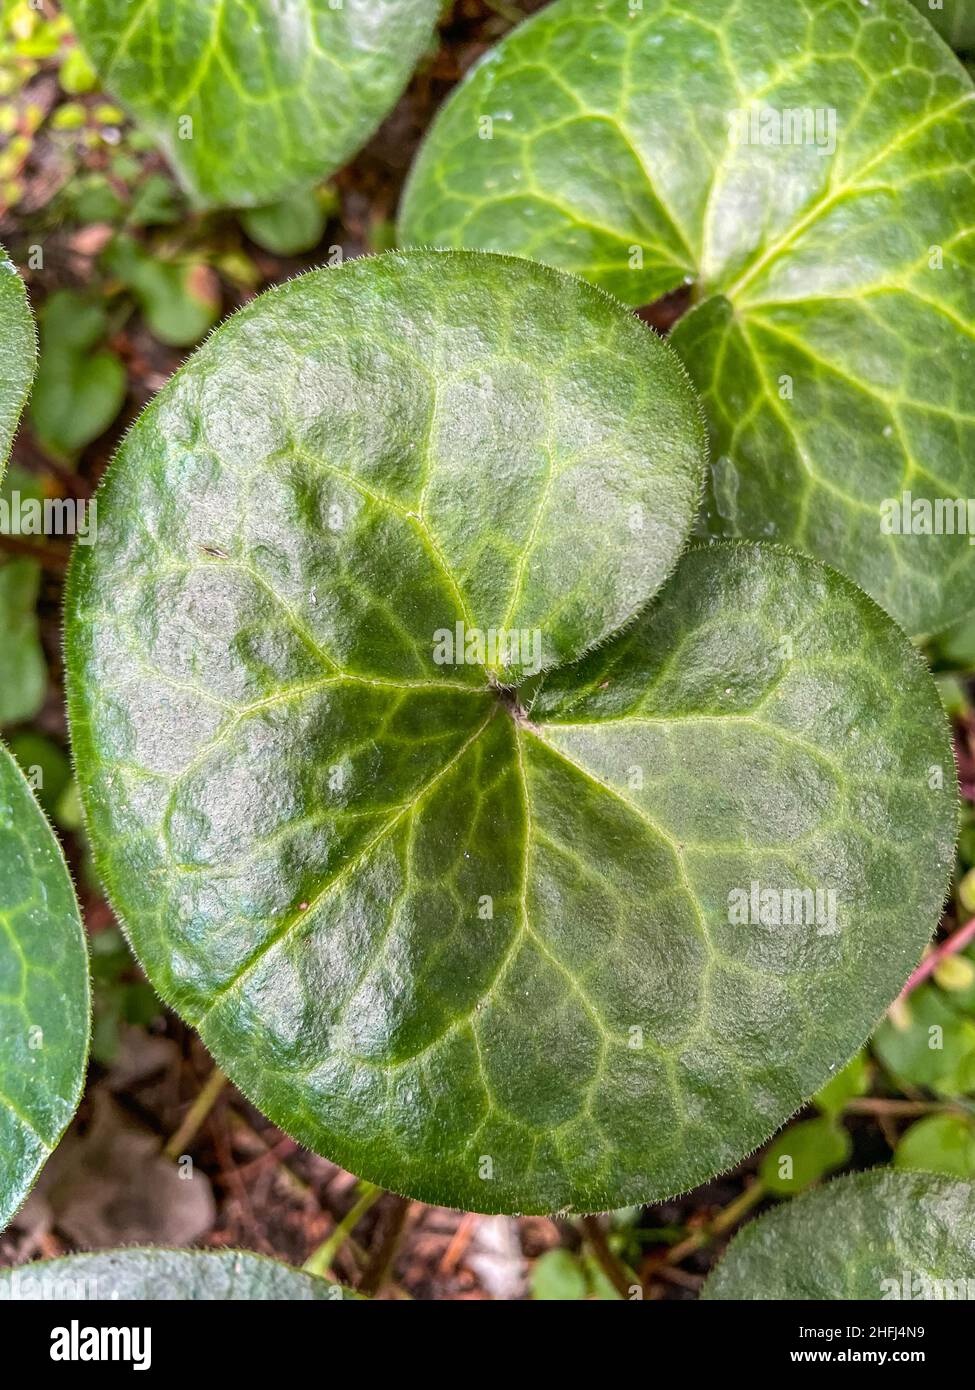 European wild ginger (Asarum europaeum) is a species of flowering plant in the birthwort family Aristolochiaceae, native to large parts of temperate E Stock Photo